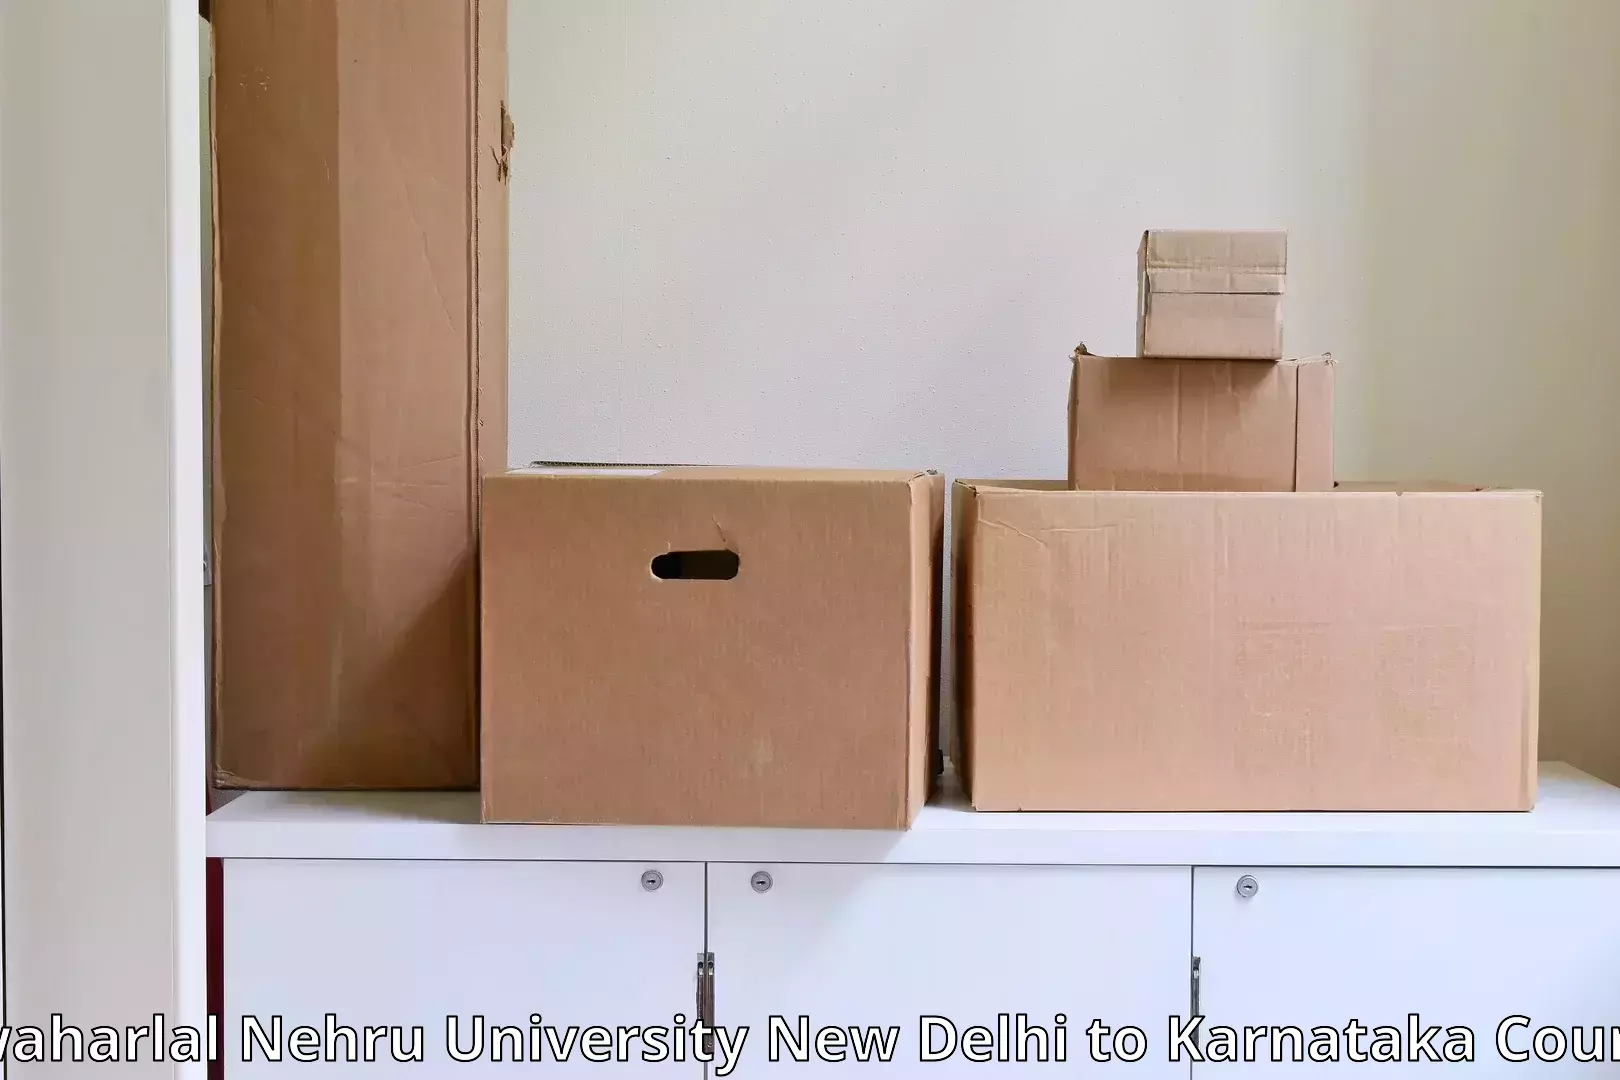 Moving and storage services in Jawaharlal Nehru University New Delhi to Afzalpur